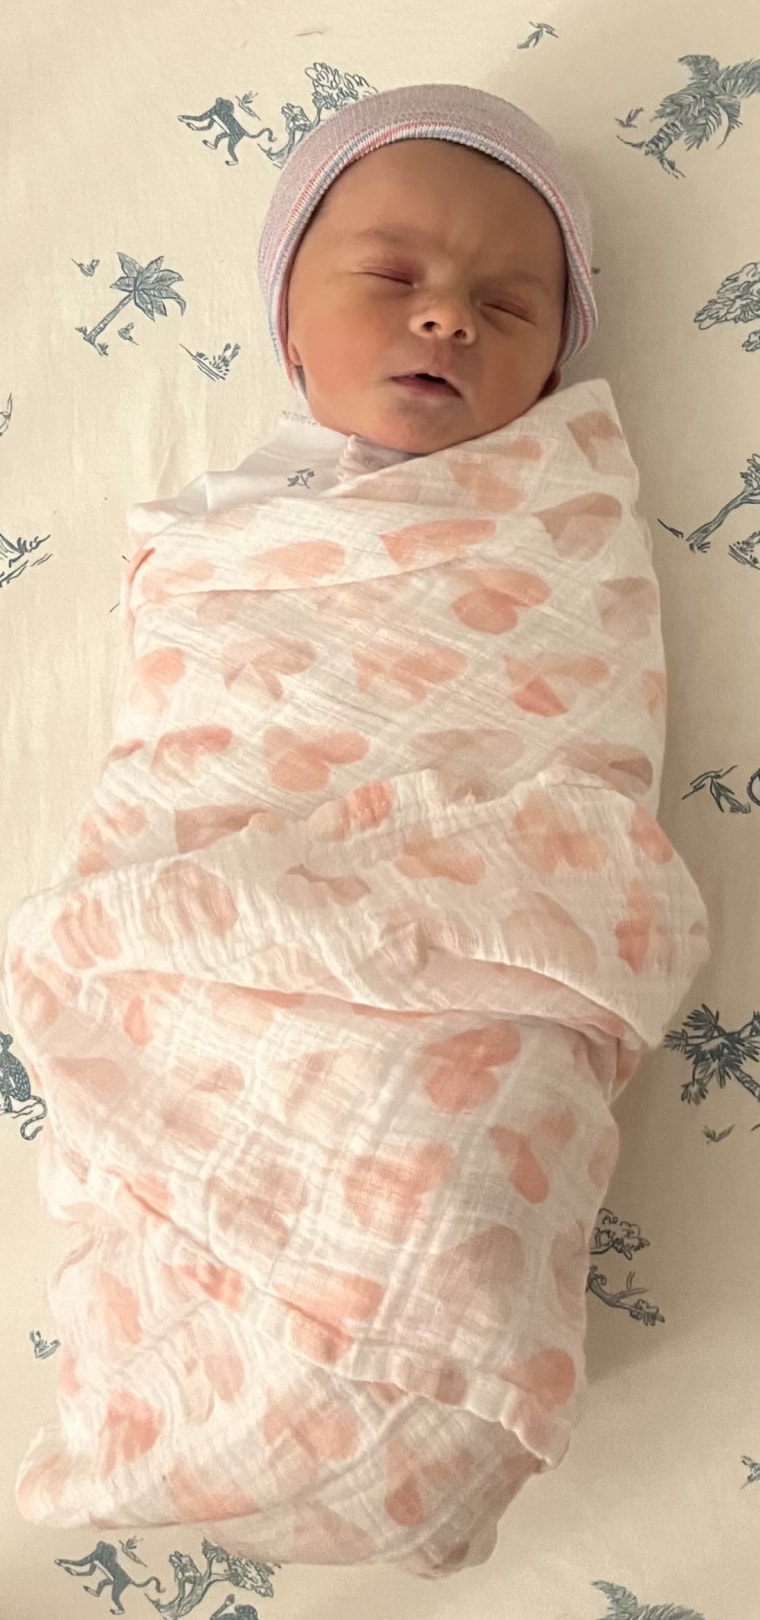 A baby on white and blue sheets swaddled in a white blanket with pink hearts.